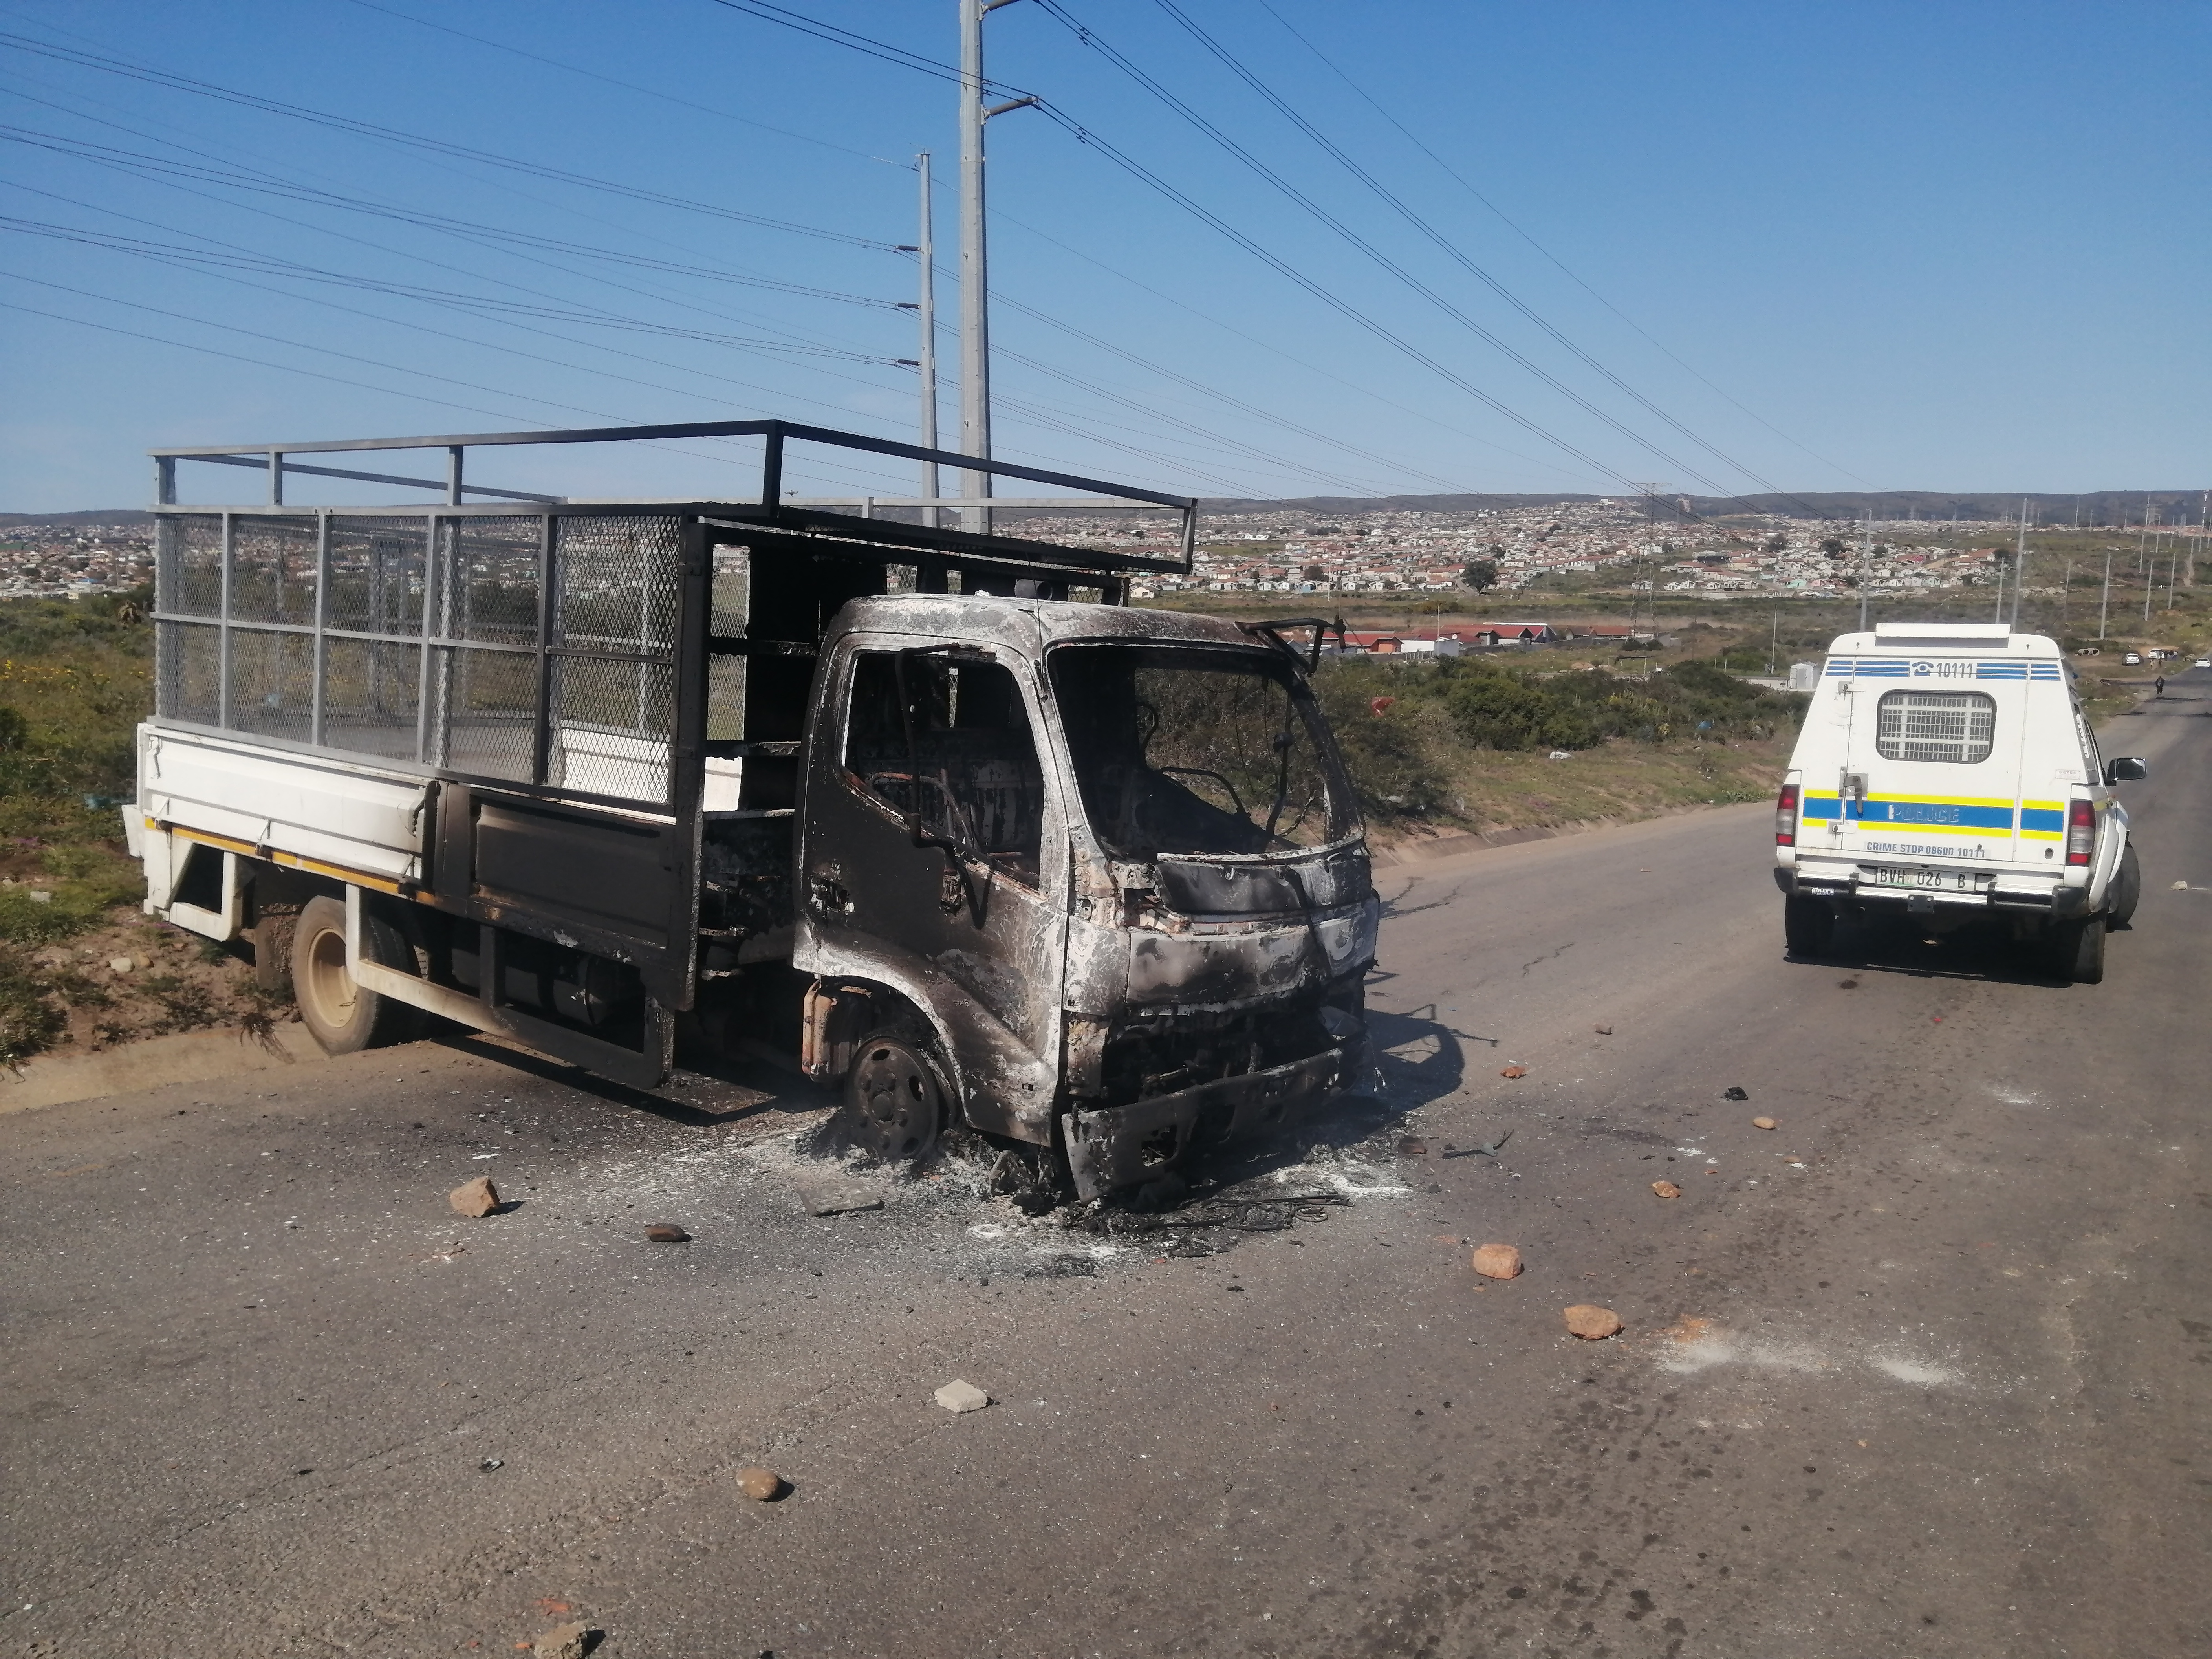 A truck torched by residents on Thursday., Gqeberha